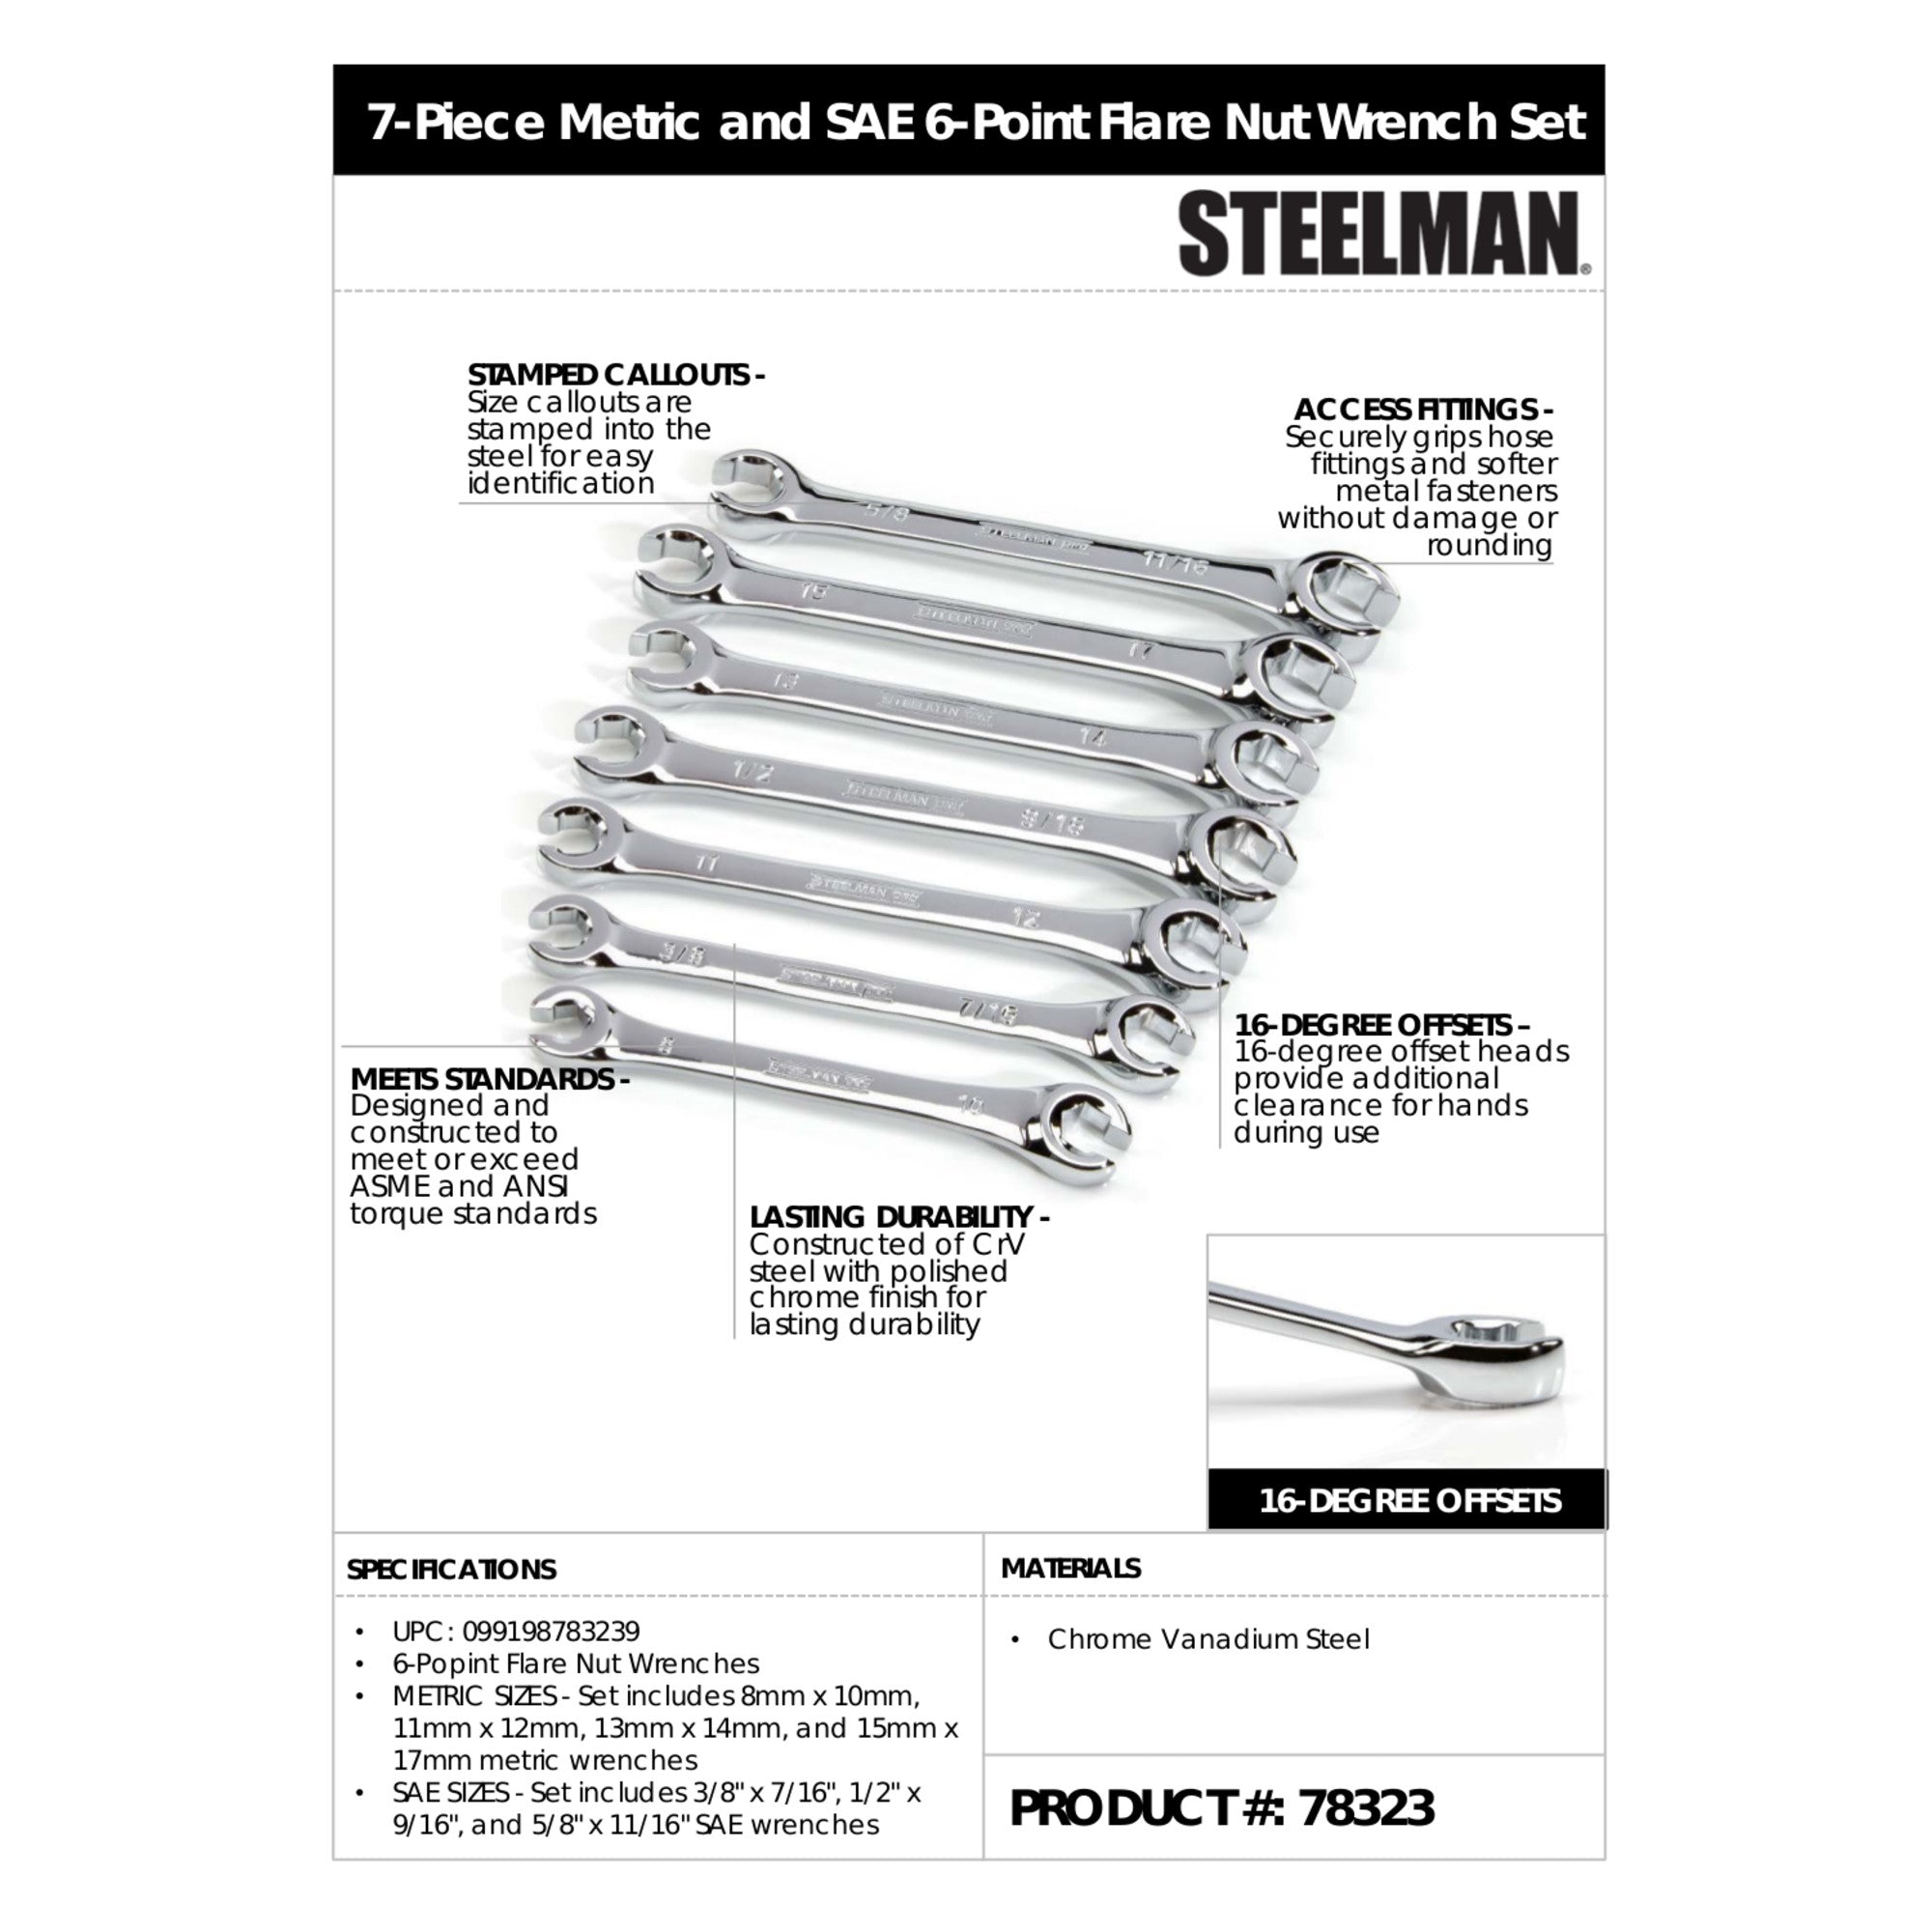 Steelman Metric And Sae 6-Point Flare Nut Wrench 7-Piece Set